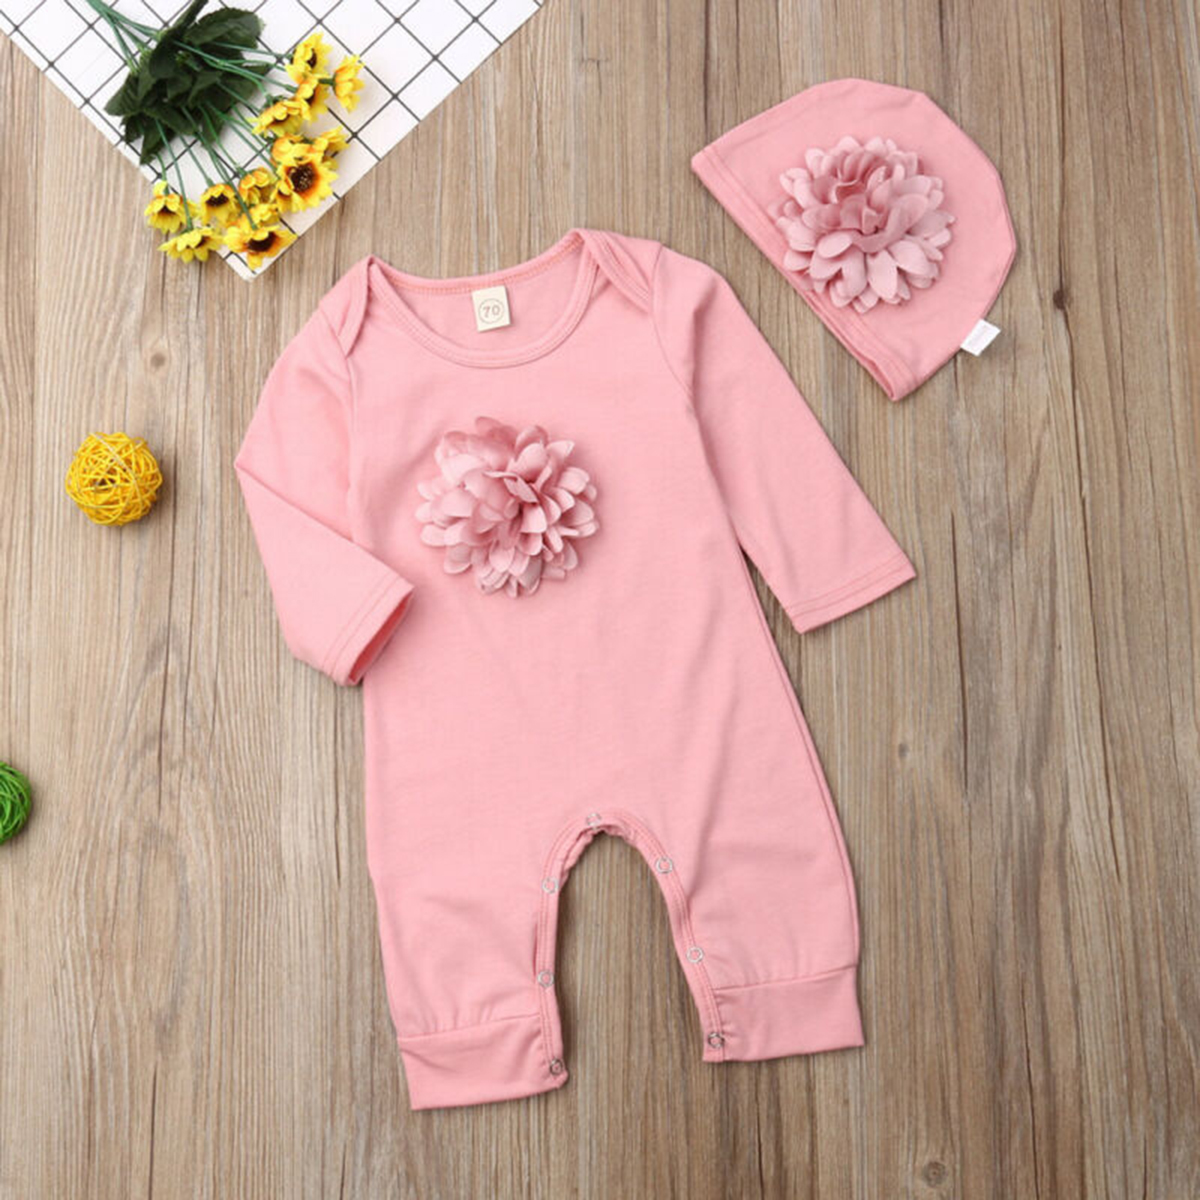 Spring-Autumn Newborn Baby Cotton Clothing Romper Boys Animal Costumes Boutique Pajama Roupa for Baby Christmas Gift 2